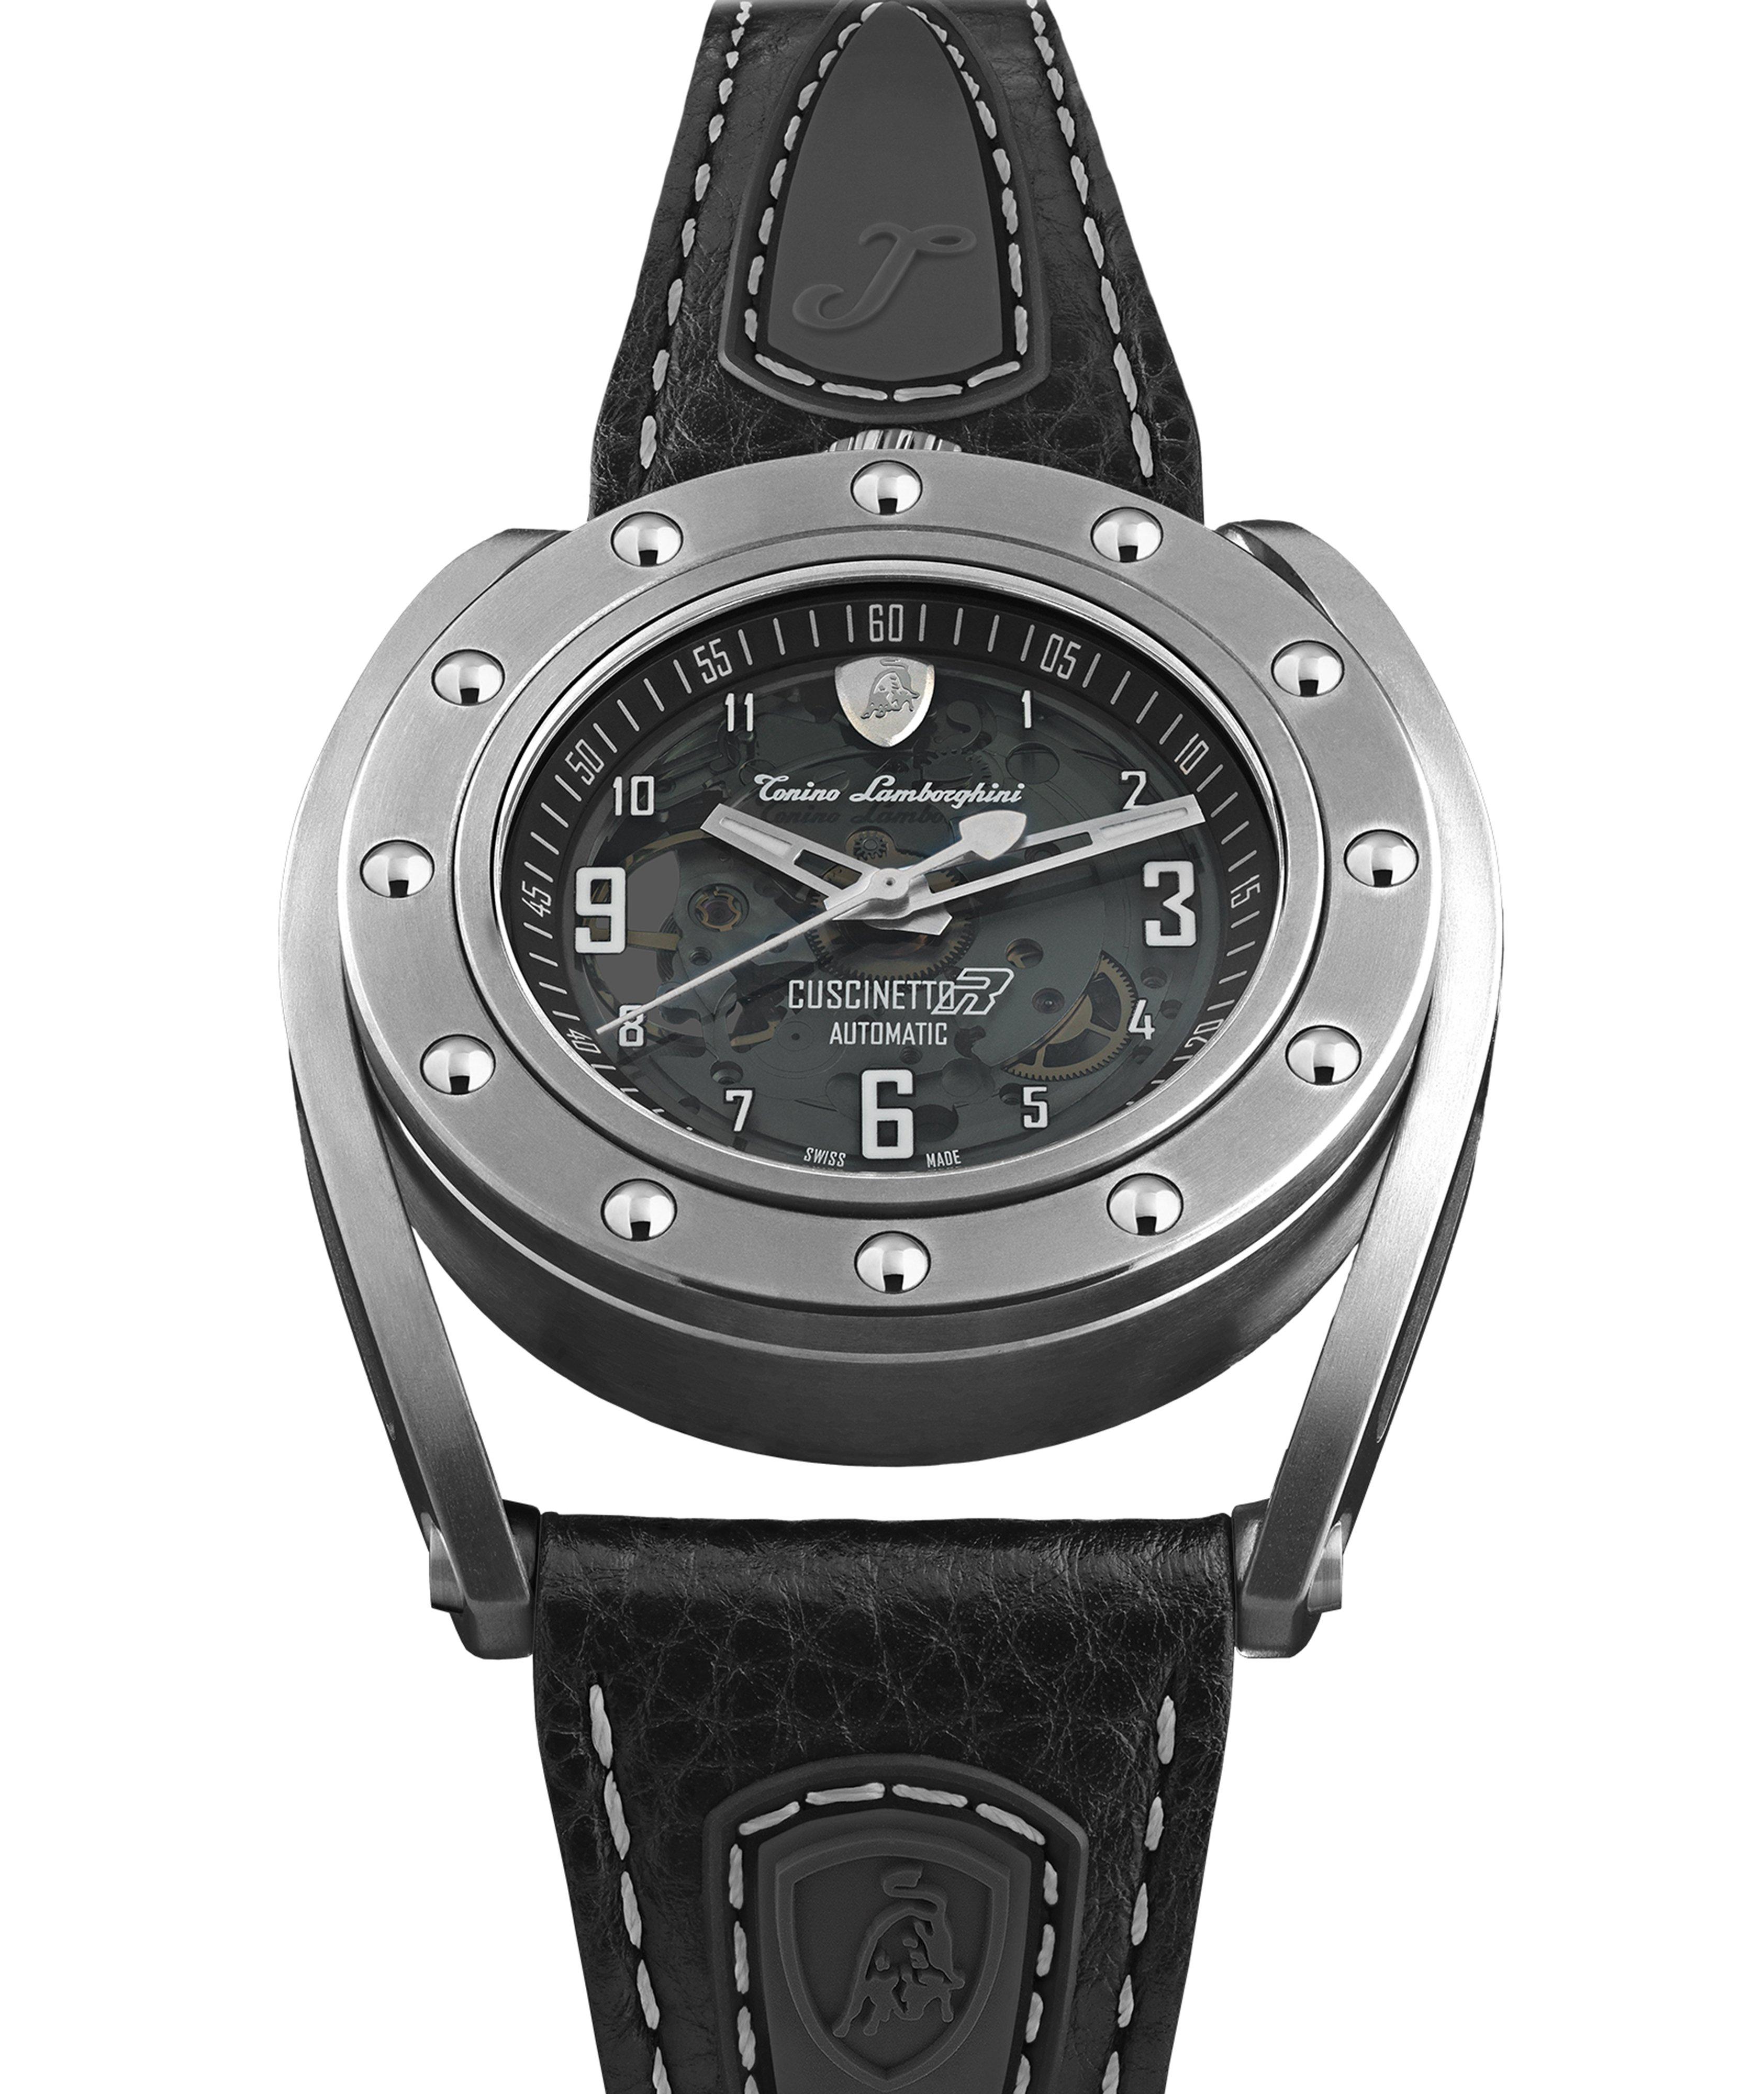 Cuscinetto R Automatic Watch  image 3